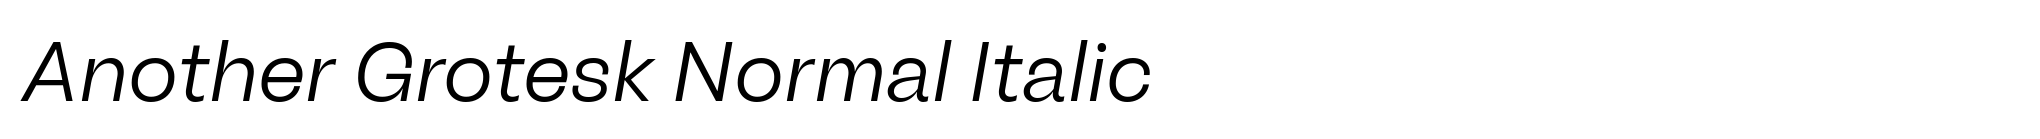 Another Grotesk Normal Italic image